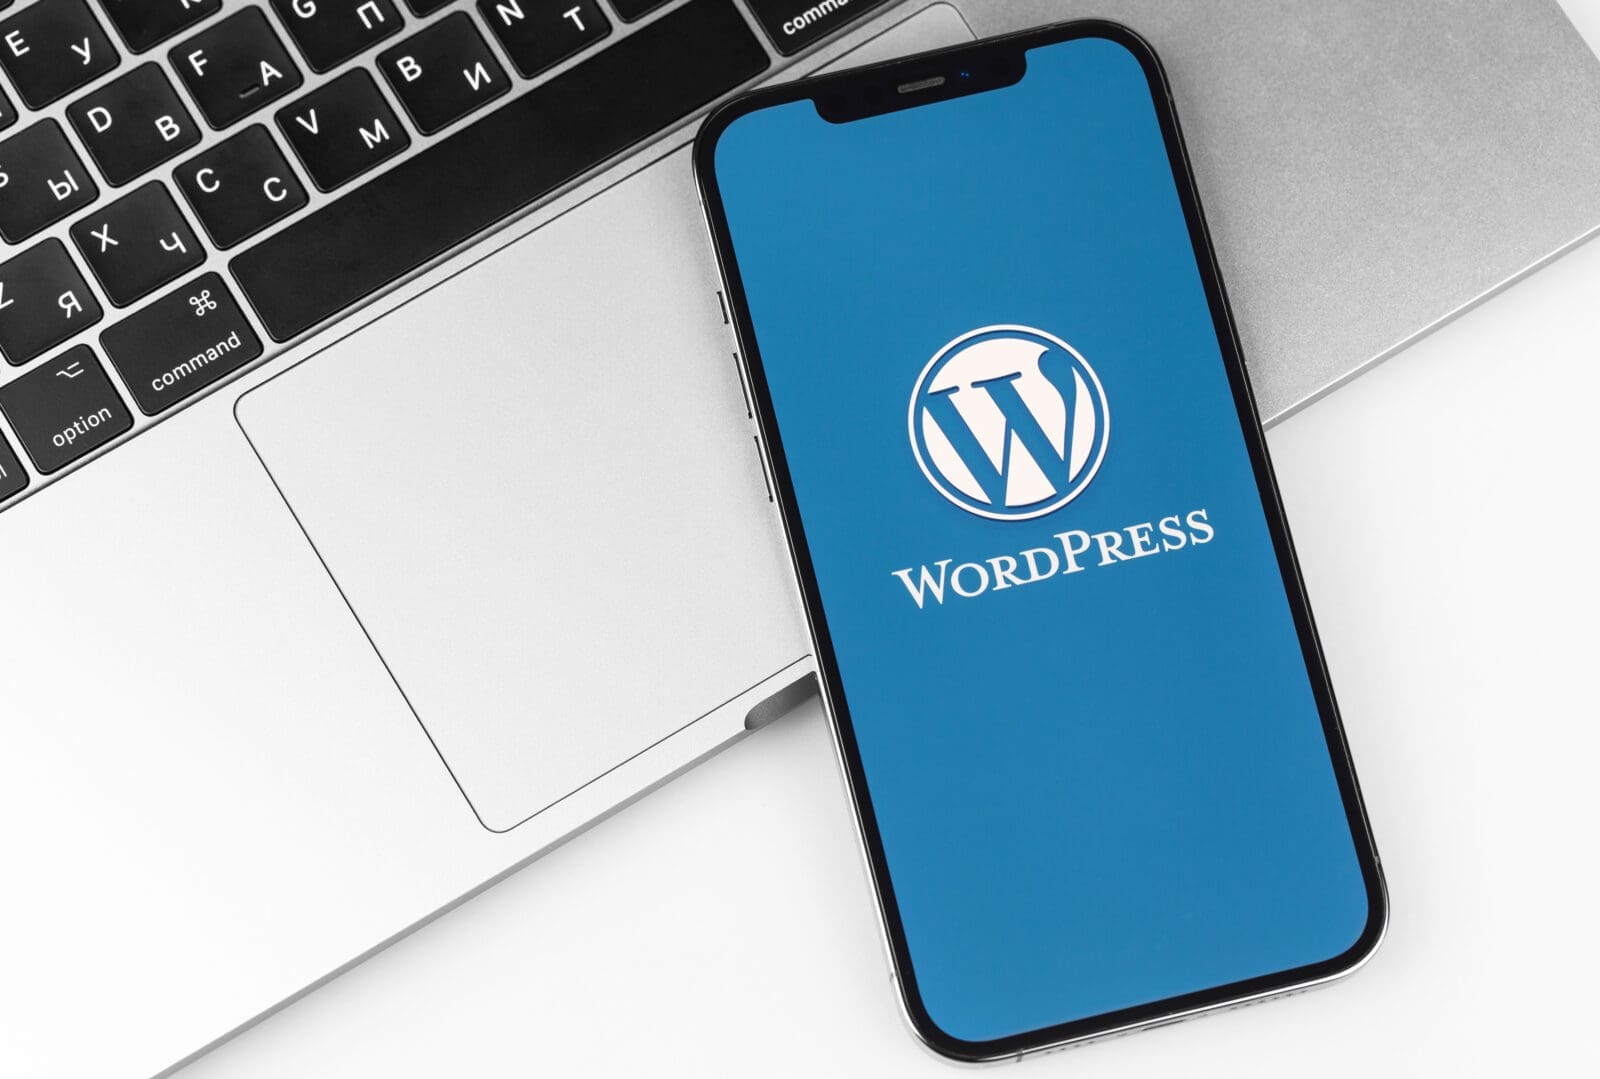 Wordpress,Logo,Mobile,App,On,Screen,Smartphone,,Iphone,With,Notebook,